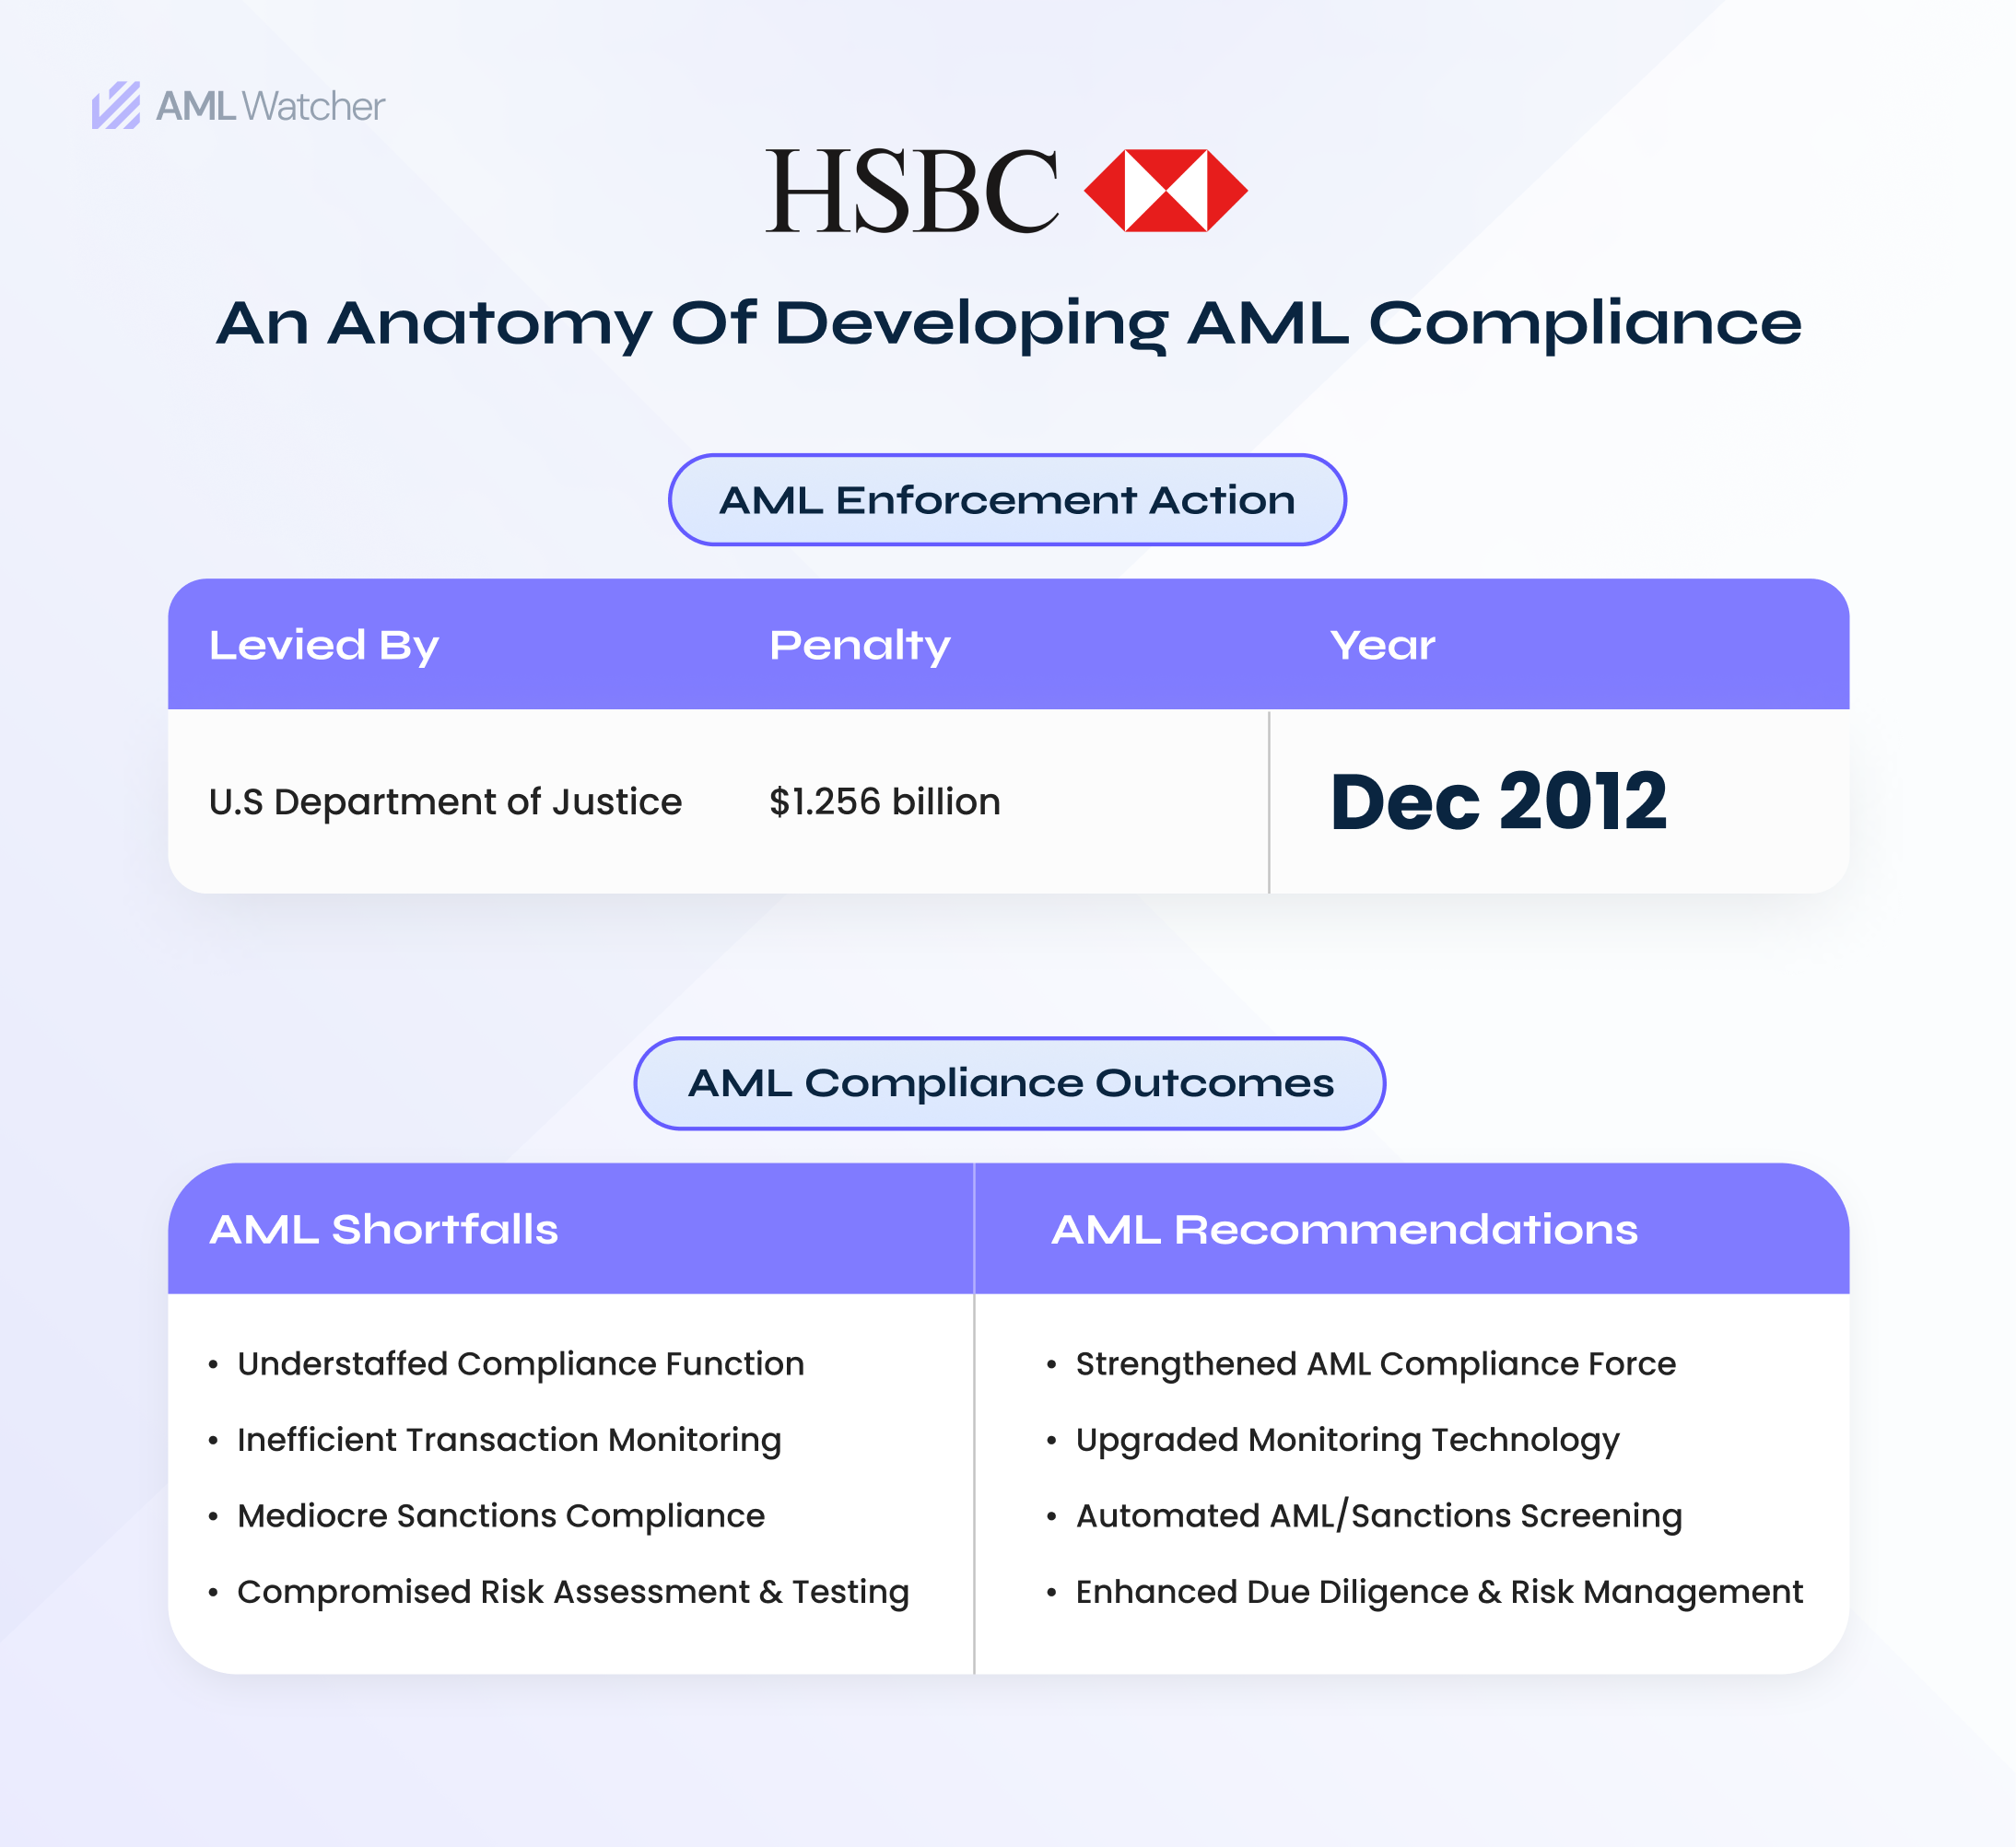 featured image explains the compliance scandal of the HSBC with AML fines, penalty year, imposing body, AML compliance shortfalls/deficiencies, and recommended AML measures